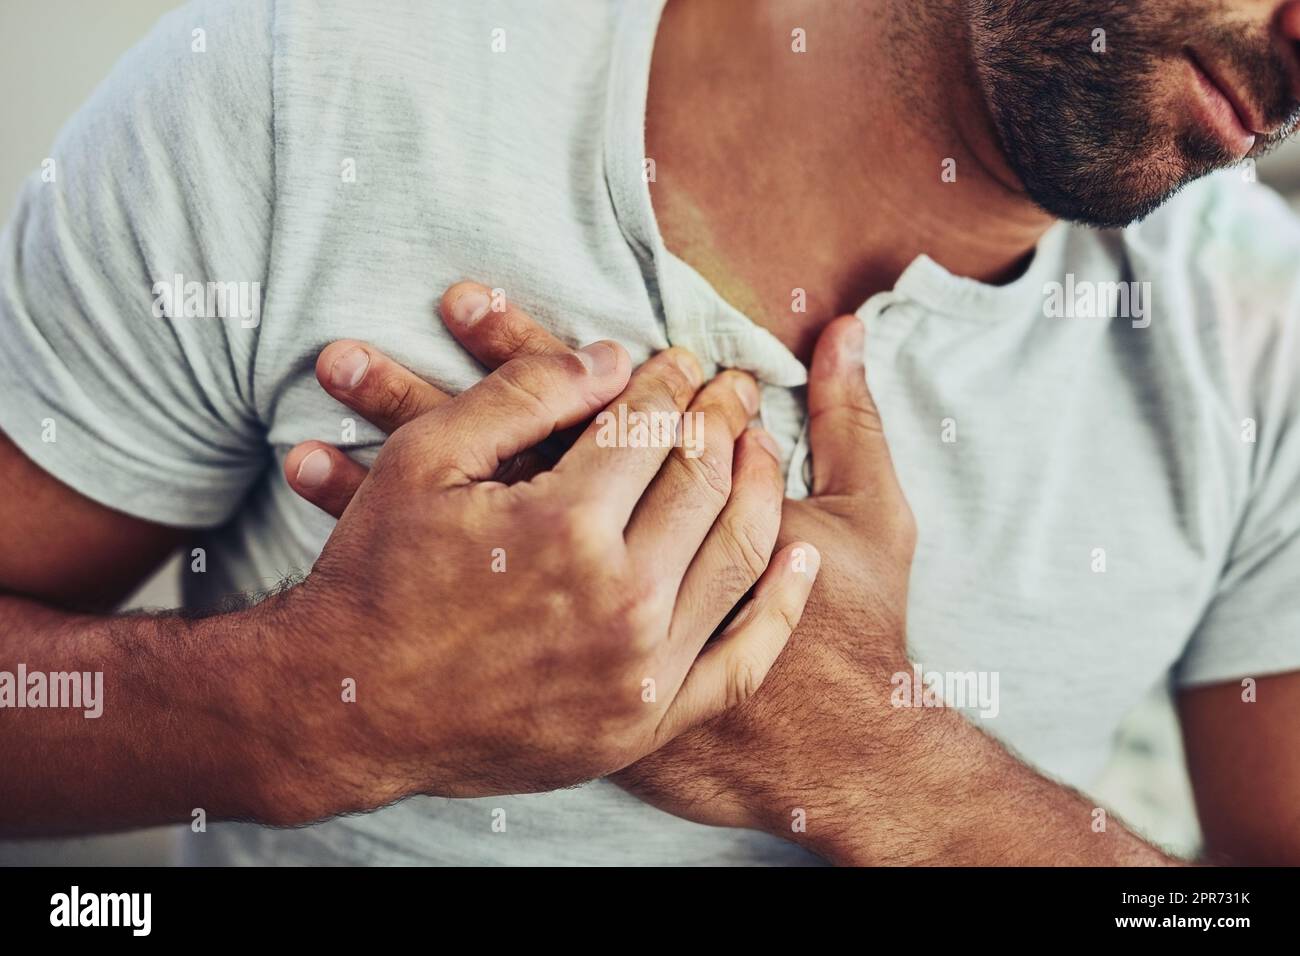 Chest pain is the worst. Shot of a unrecognisable young man holding his chest in discomfort with his hands due to pain in that area. Stock Photo